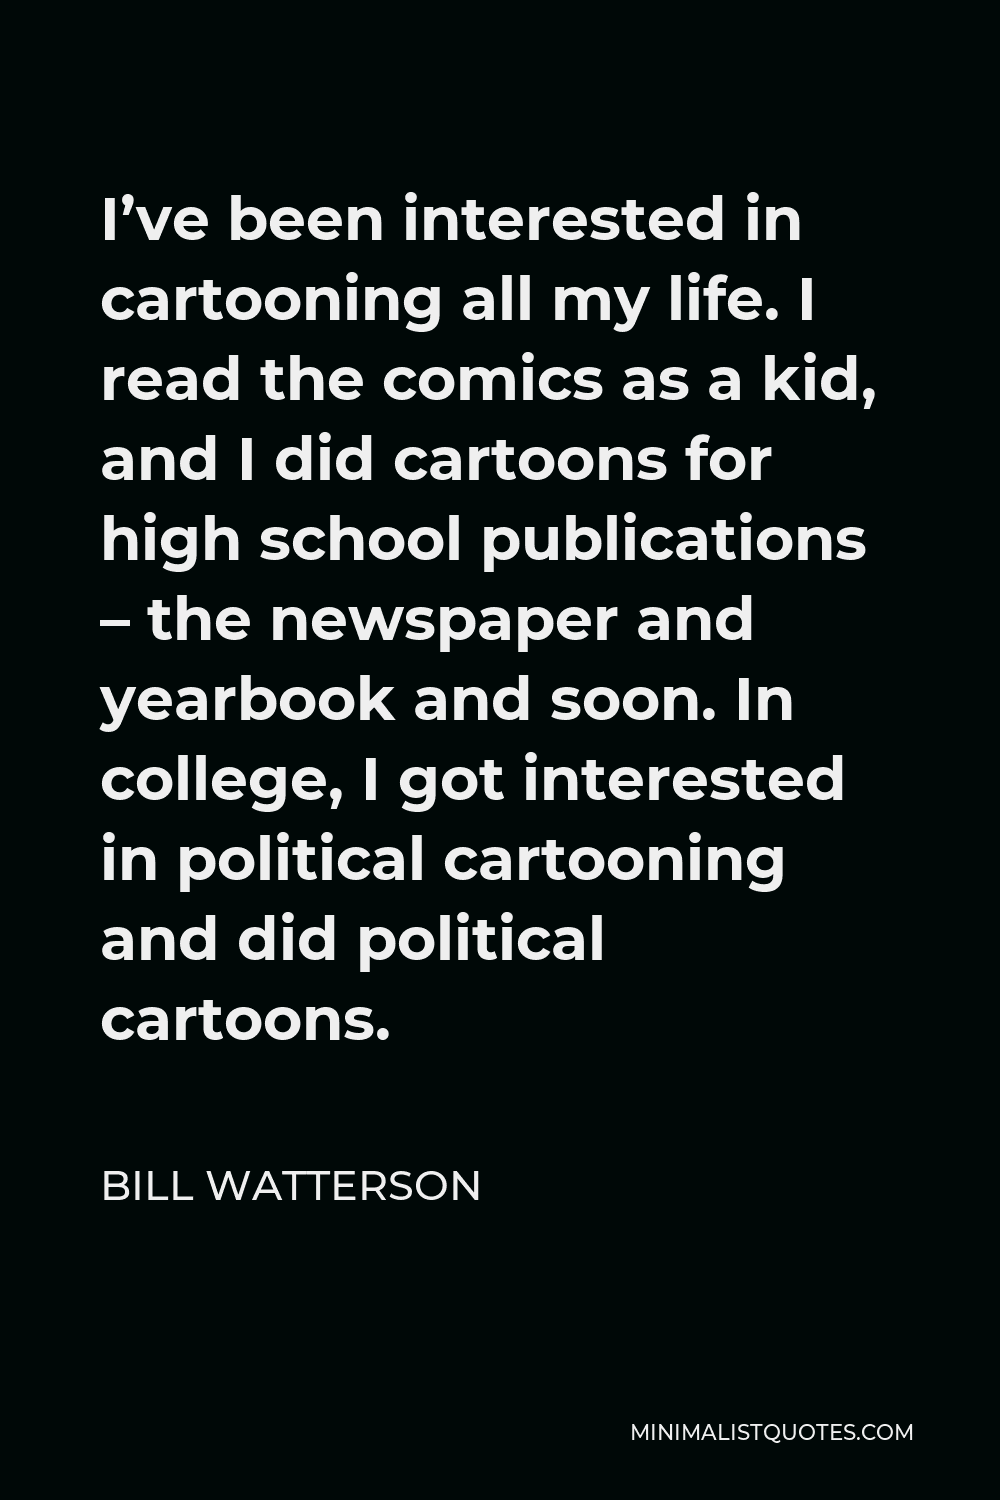 Bill Watterson Quote - I’ve been interested in cartooning all my life. I read the comics as a kid, and I did cartoons for high school publications – the newspaper and yearbook and soon. In college, I got interested in political cartooning and did political cartoons.